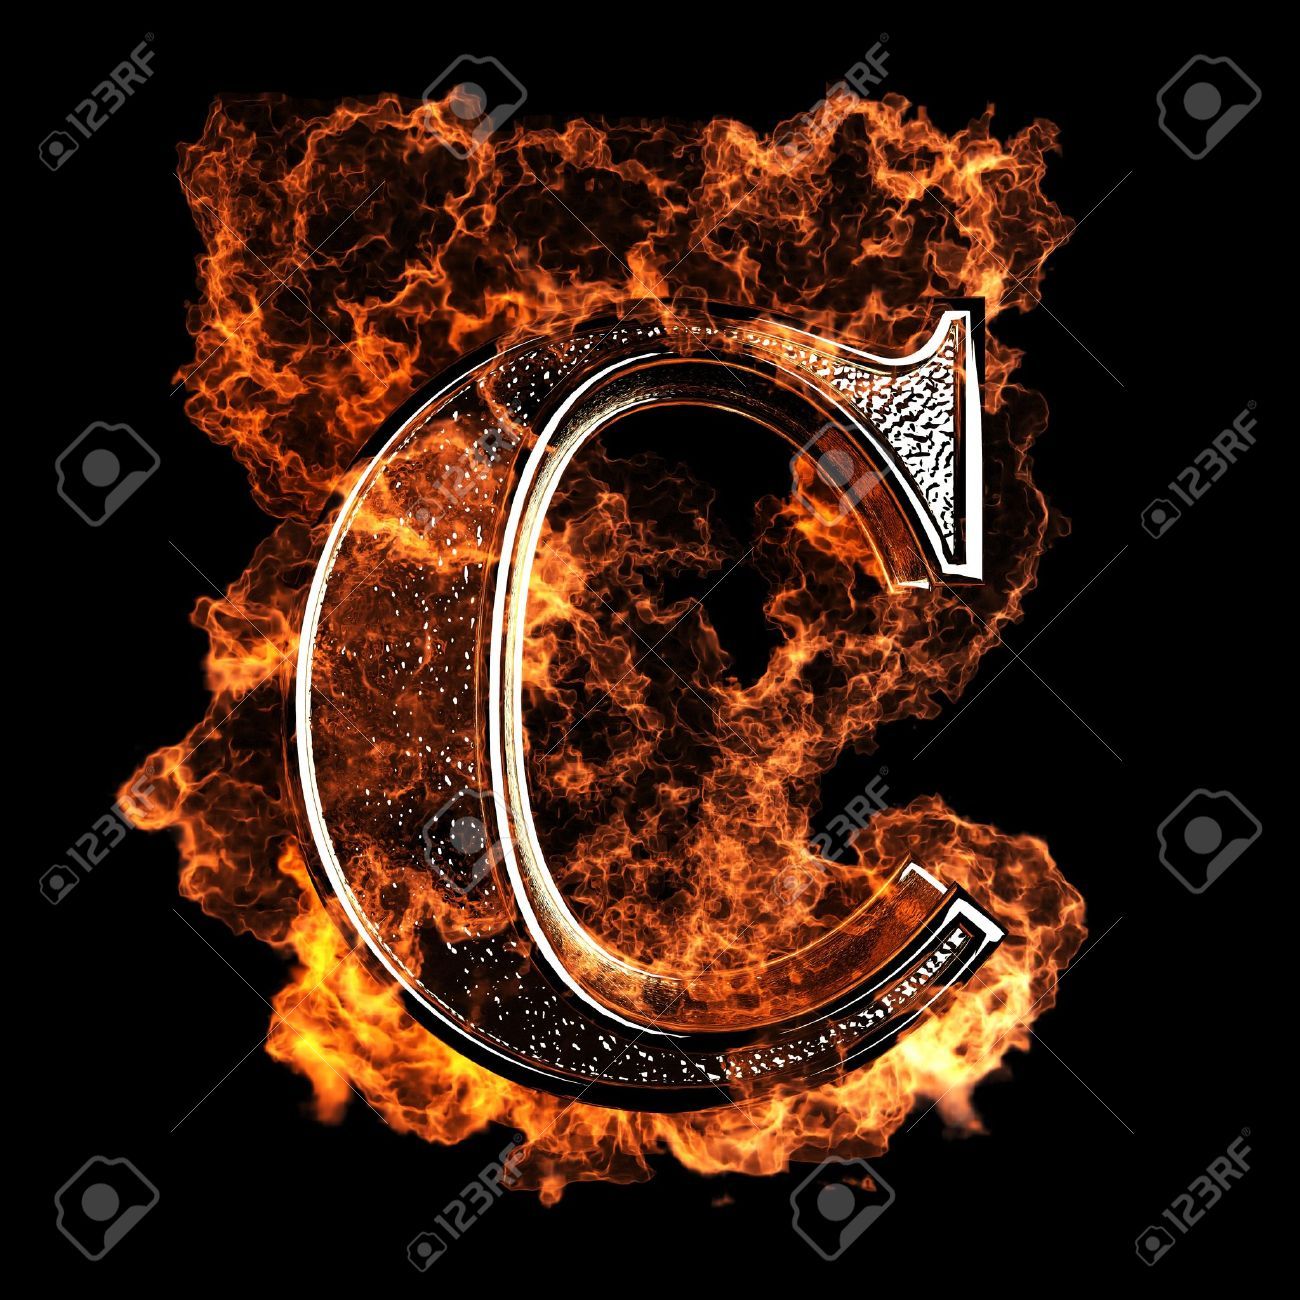 Letter C Wallpapers